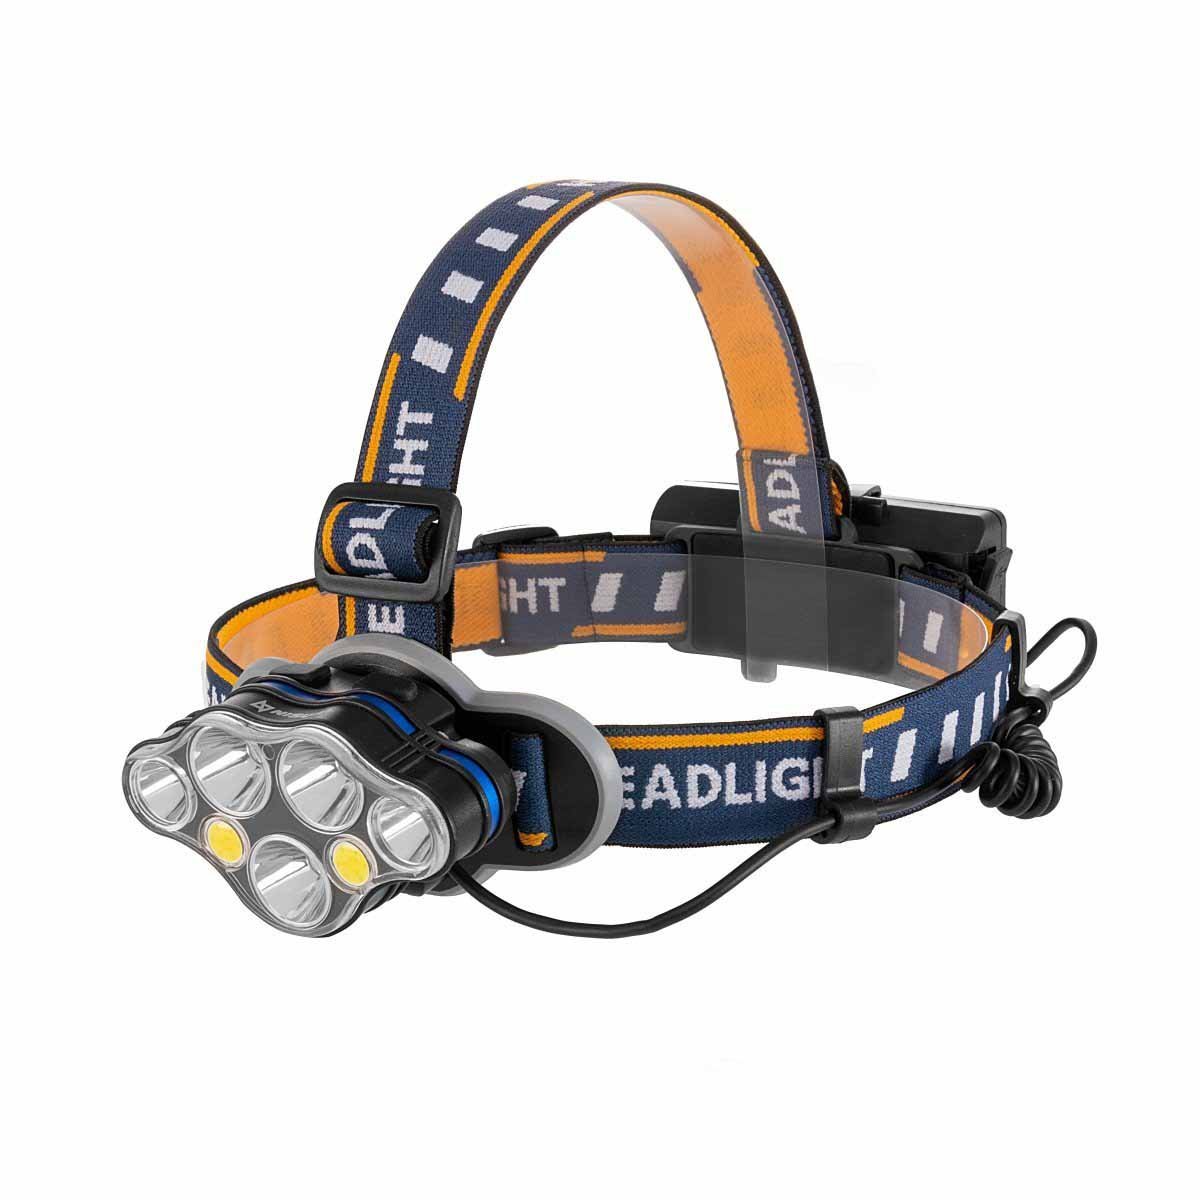 LED Rechargeable Water-resistant Headlamp, Red and White Light